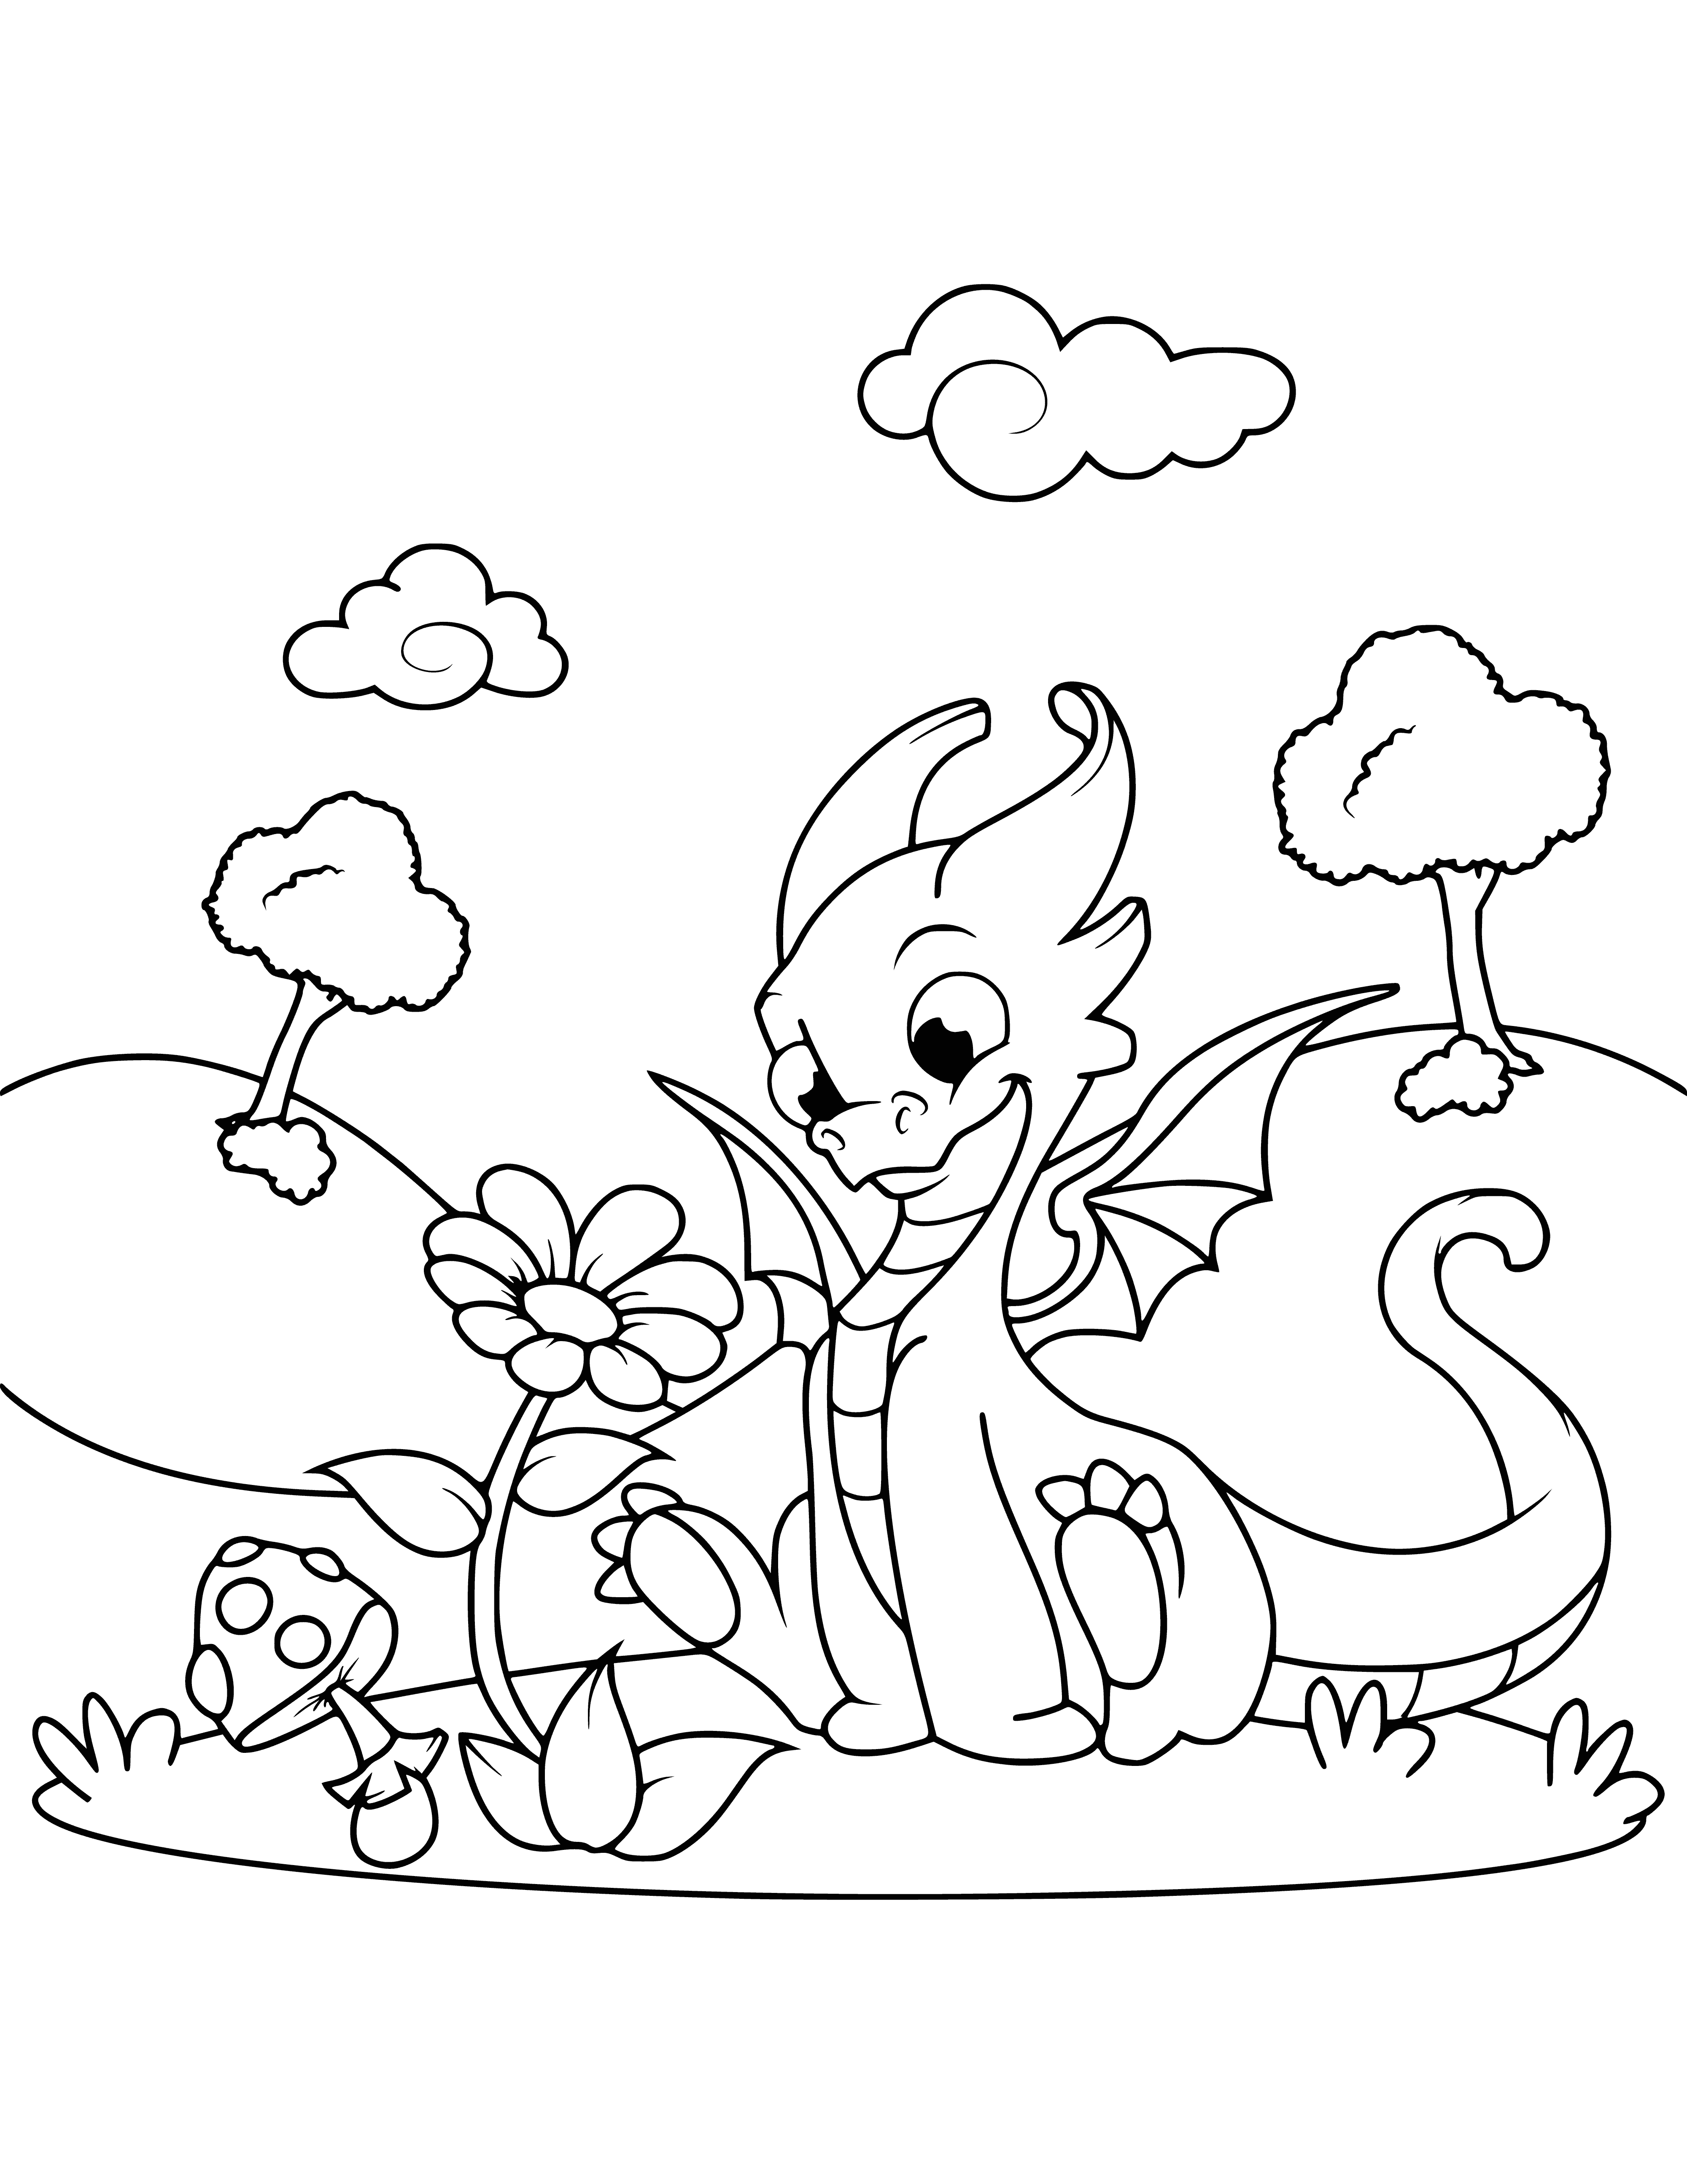 coloring page: A dragon gazes at a flower, its wings spread and left paw off the ground.